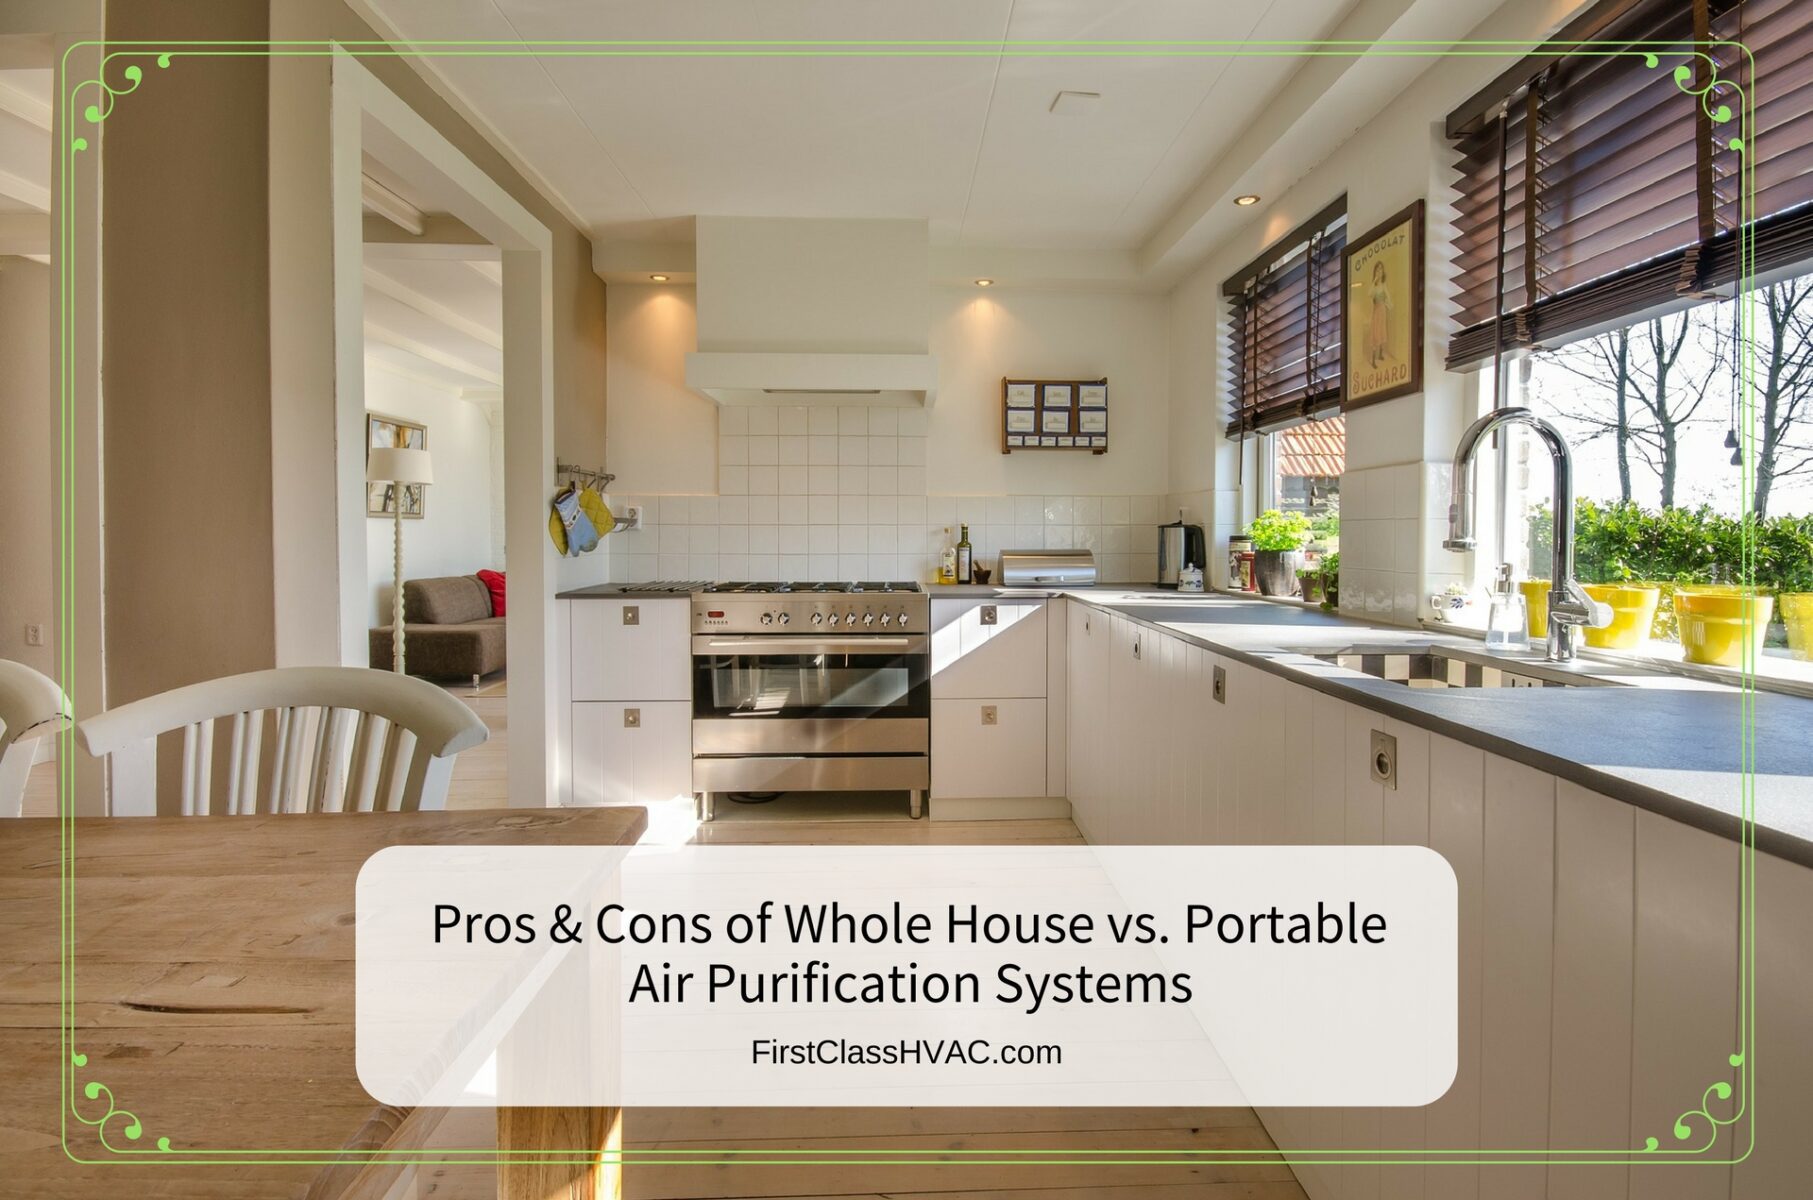 Pros and Cons of Whole House vs Portable Air Purifiers